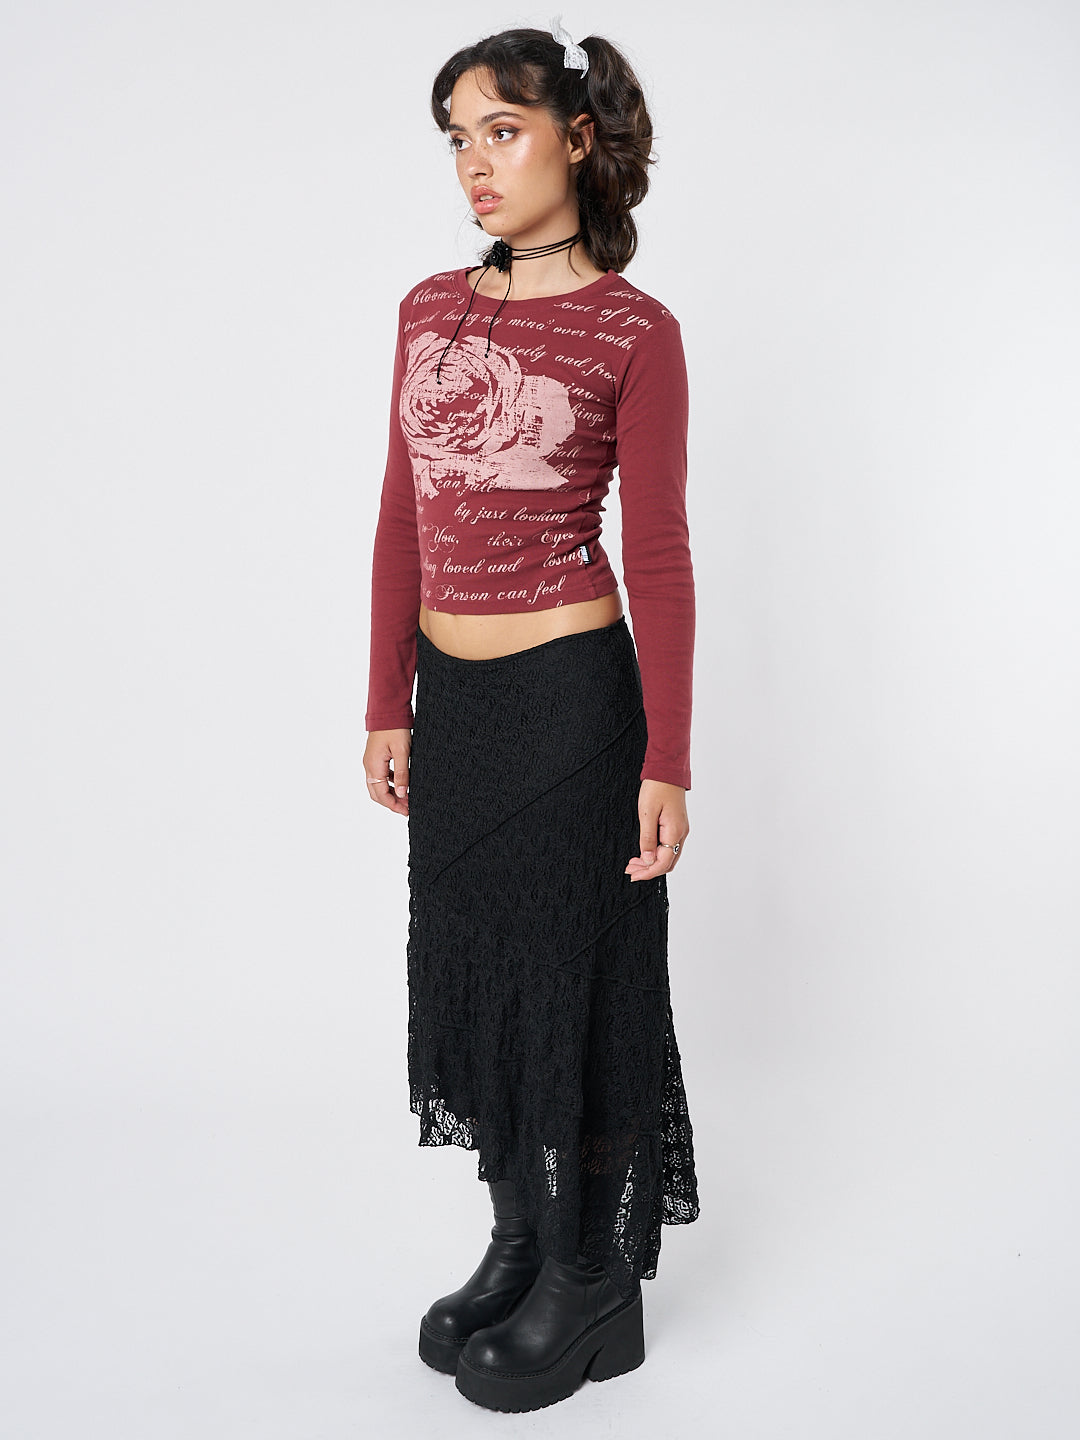 Lost Rose Burgundy Graphic Top